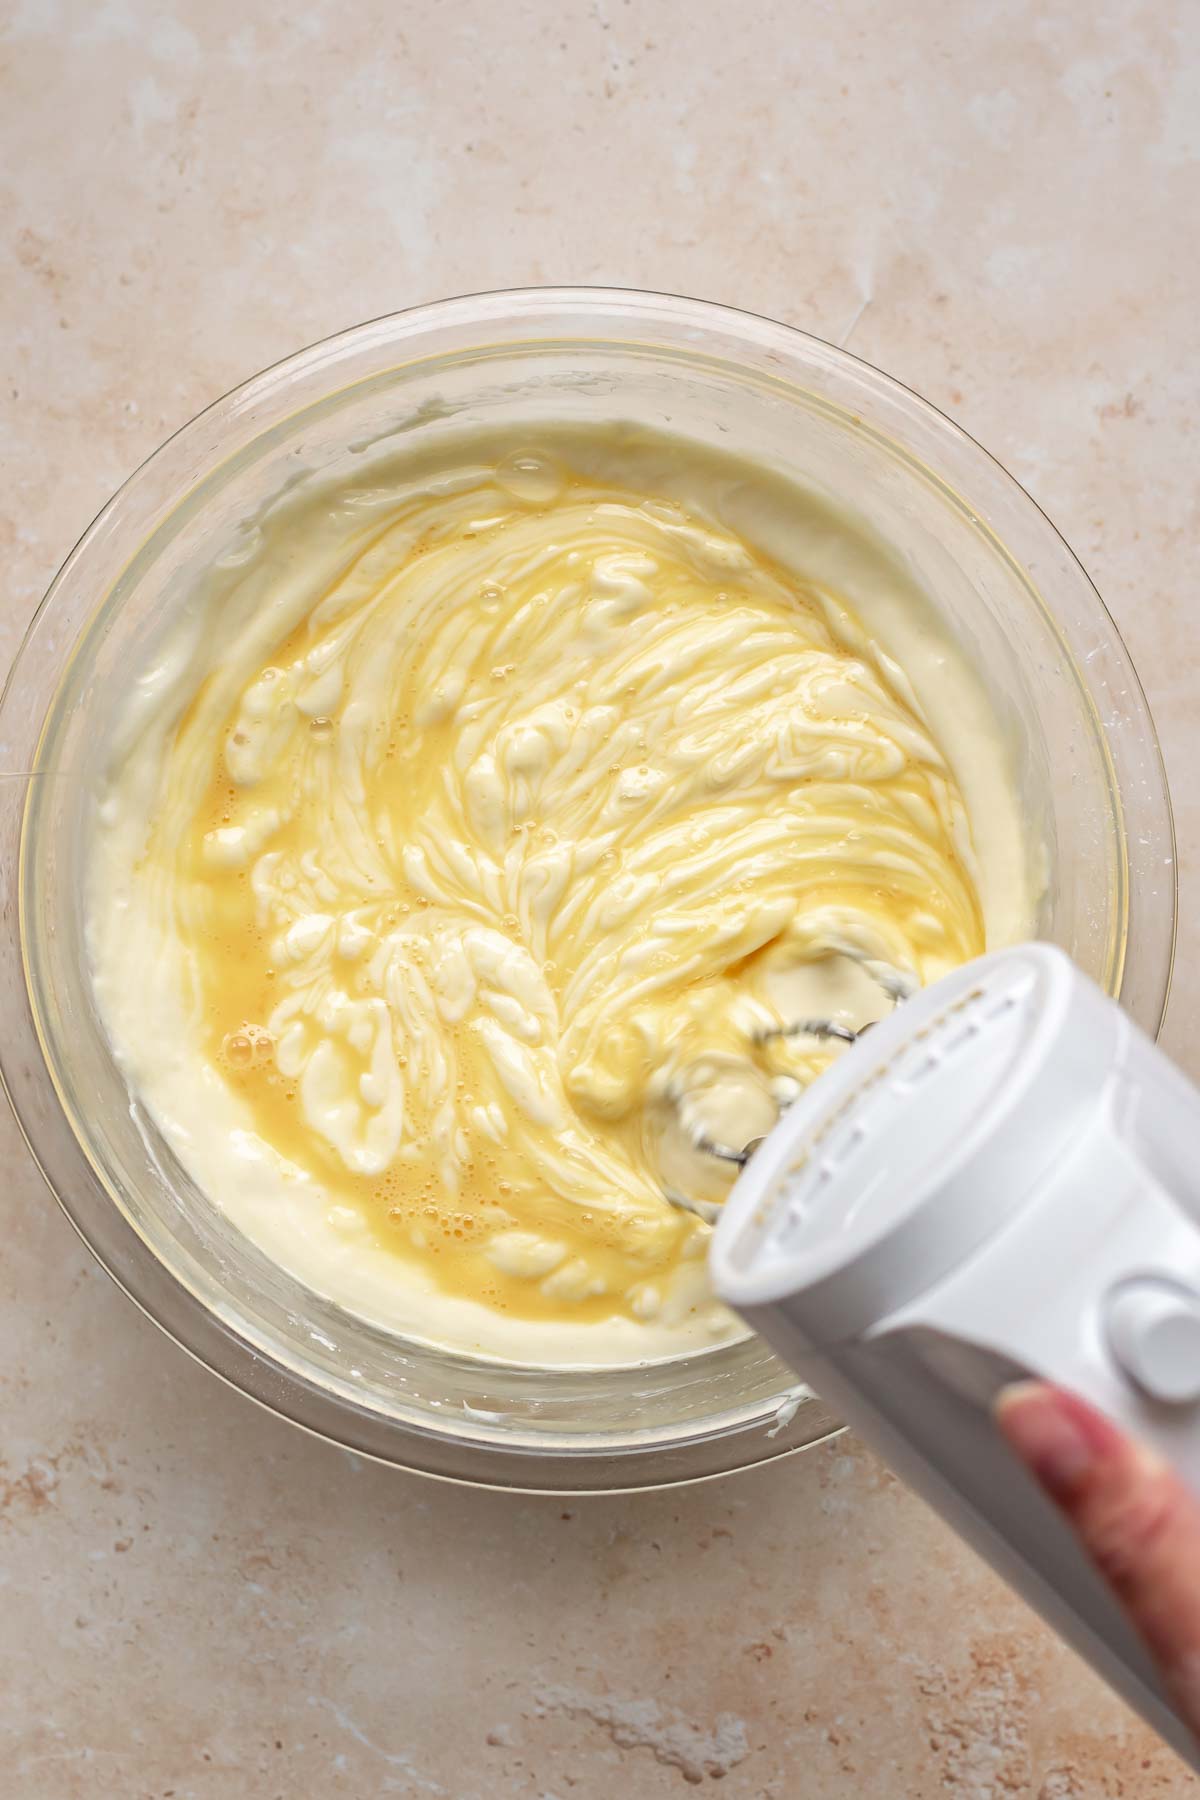 A mixer beats whisked eggs into cheesecake batter.